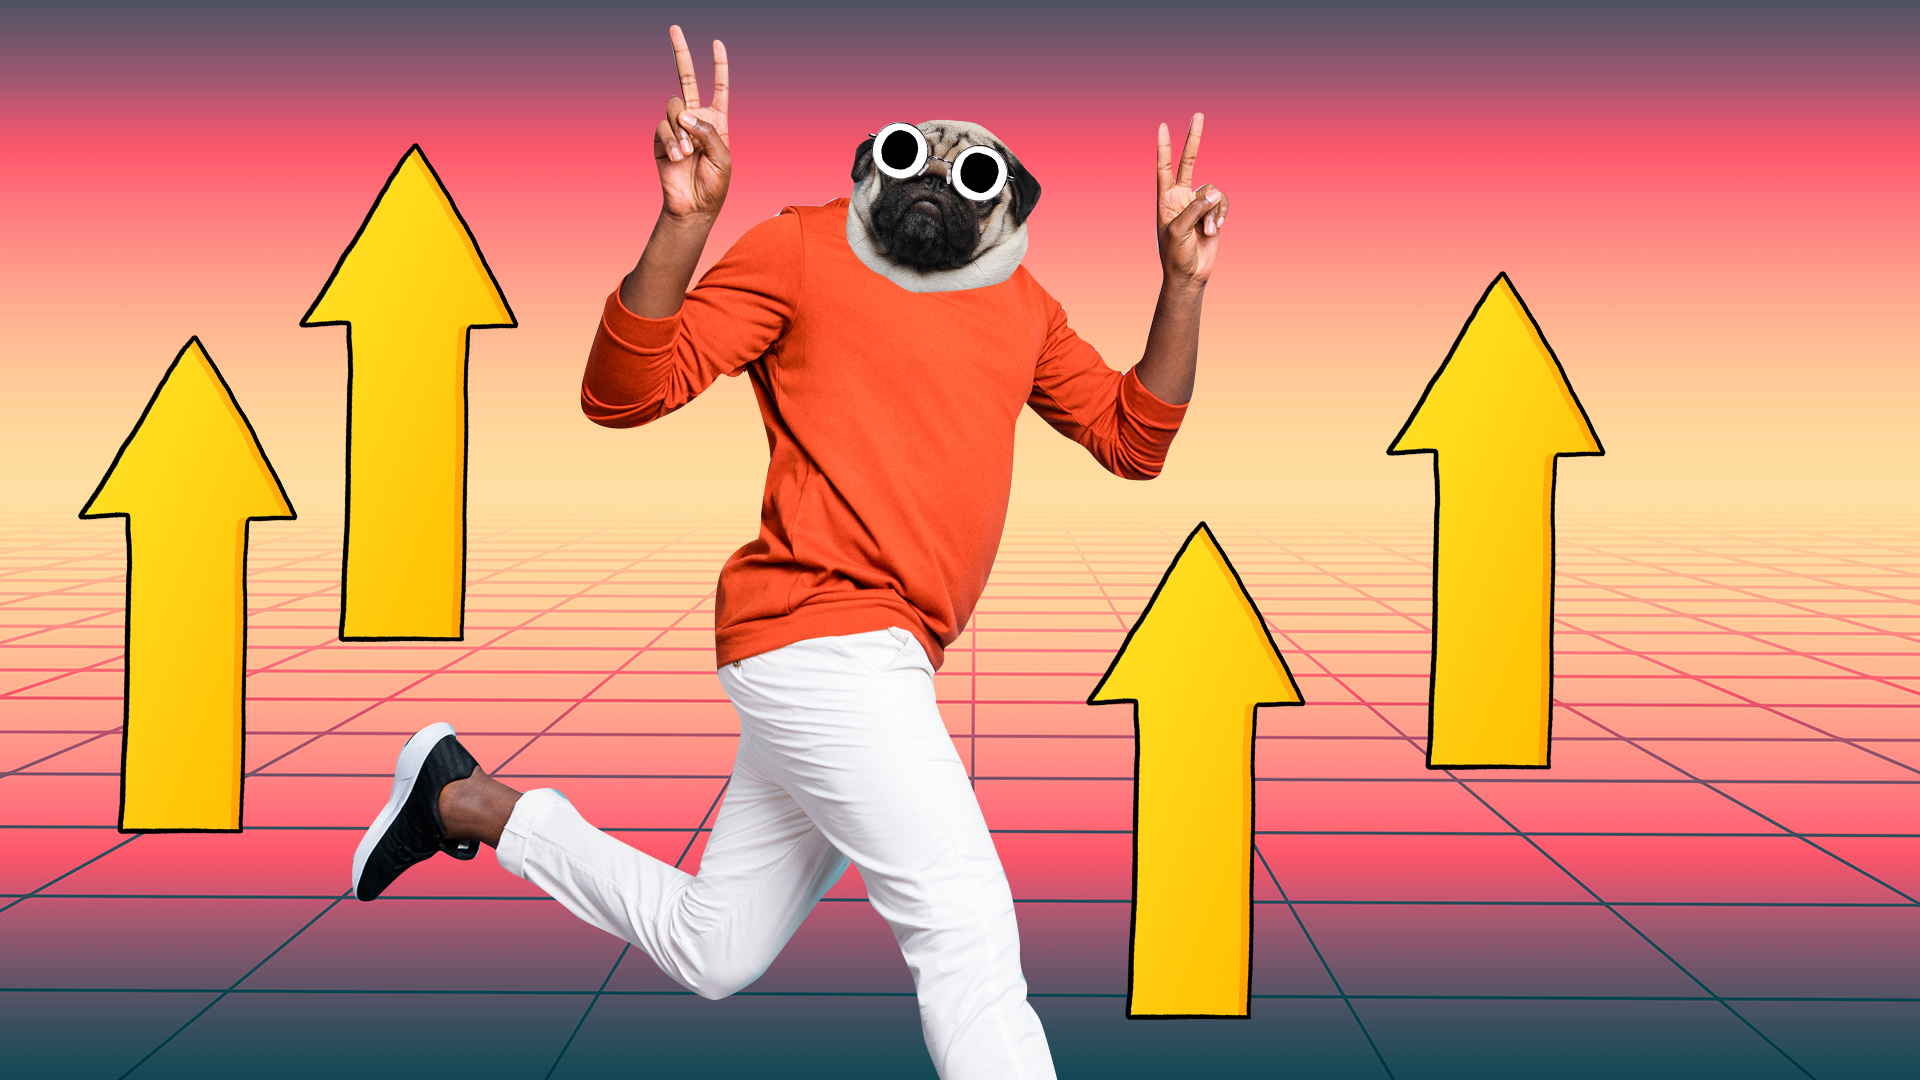 A person with a pug's head running with a 80s retro background 